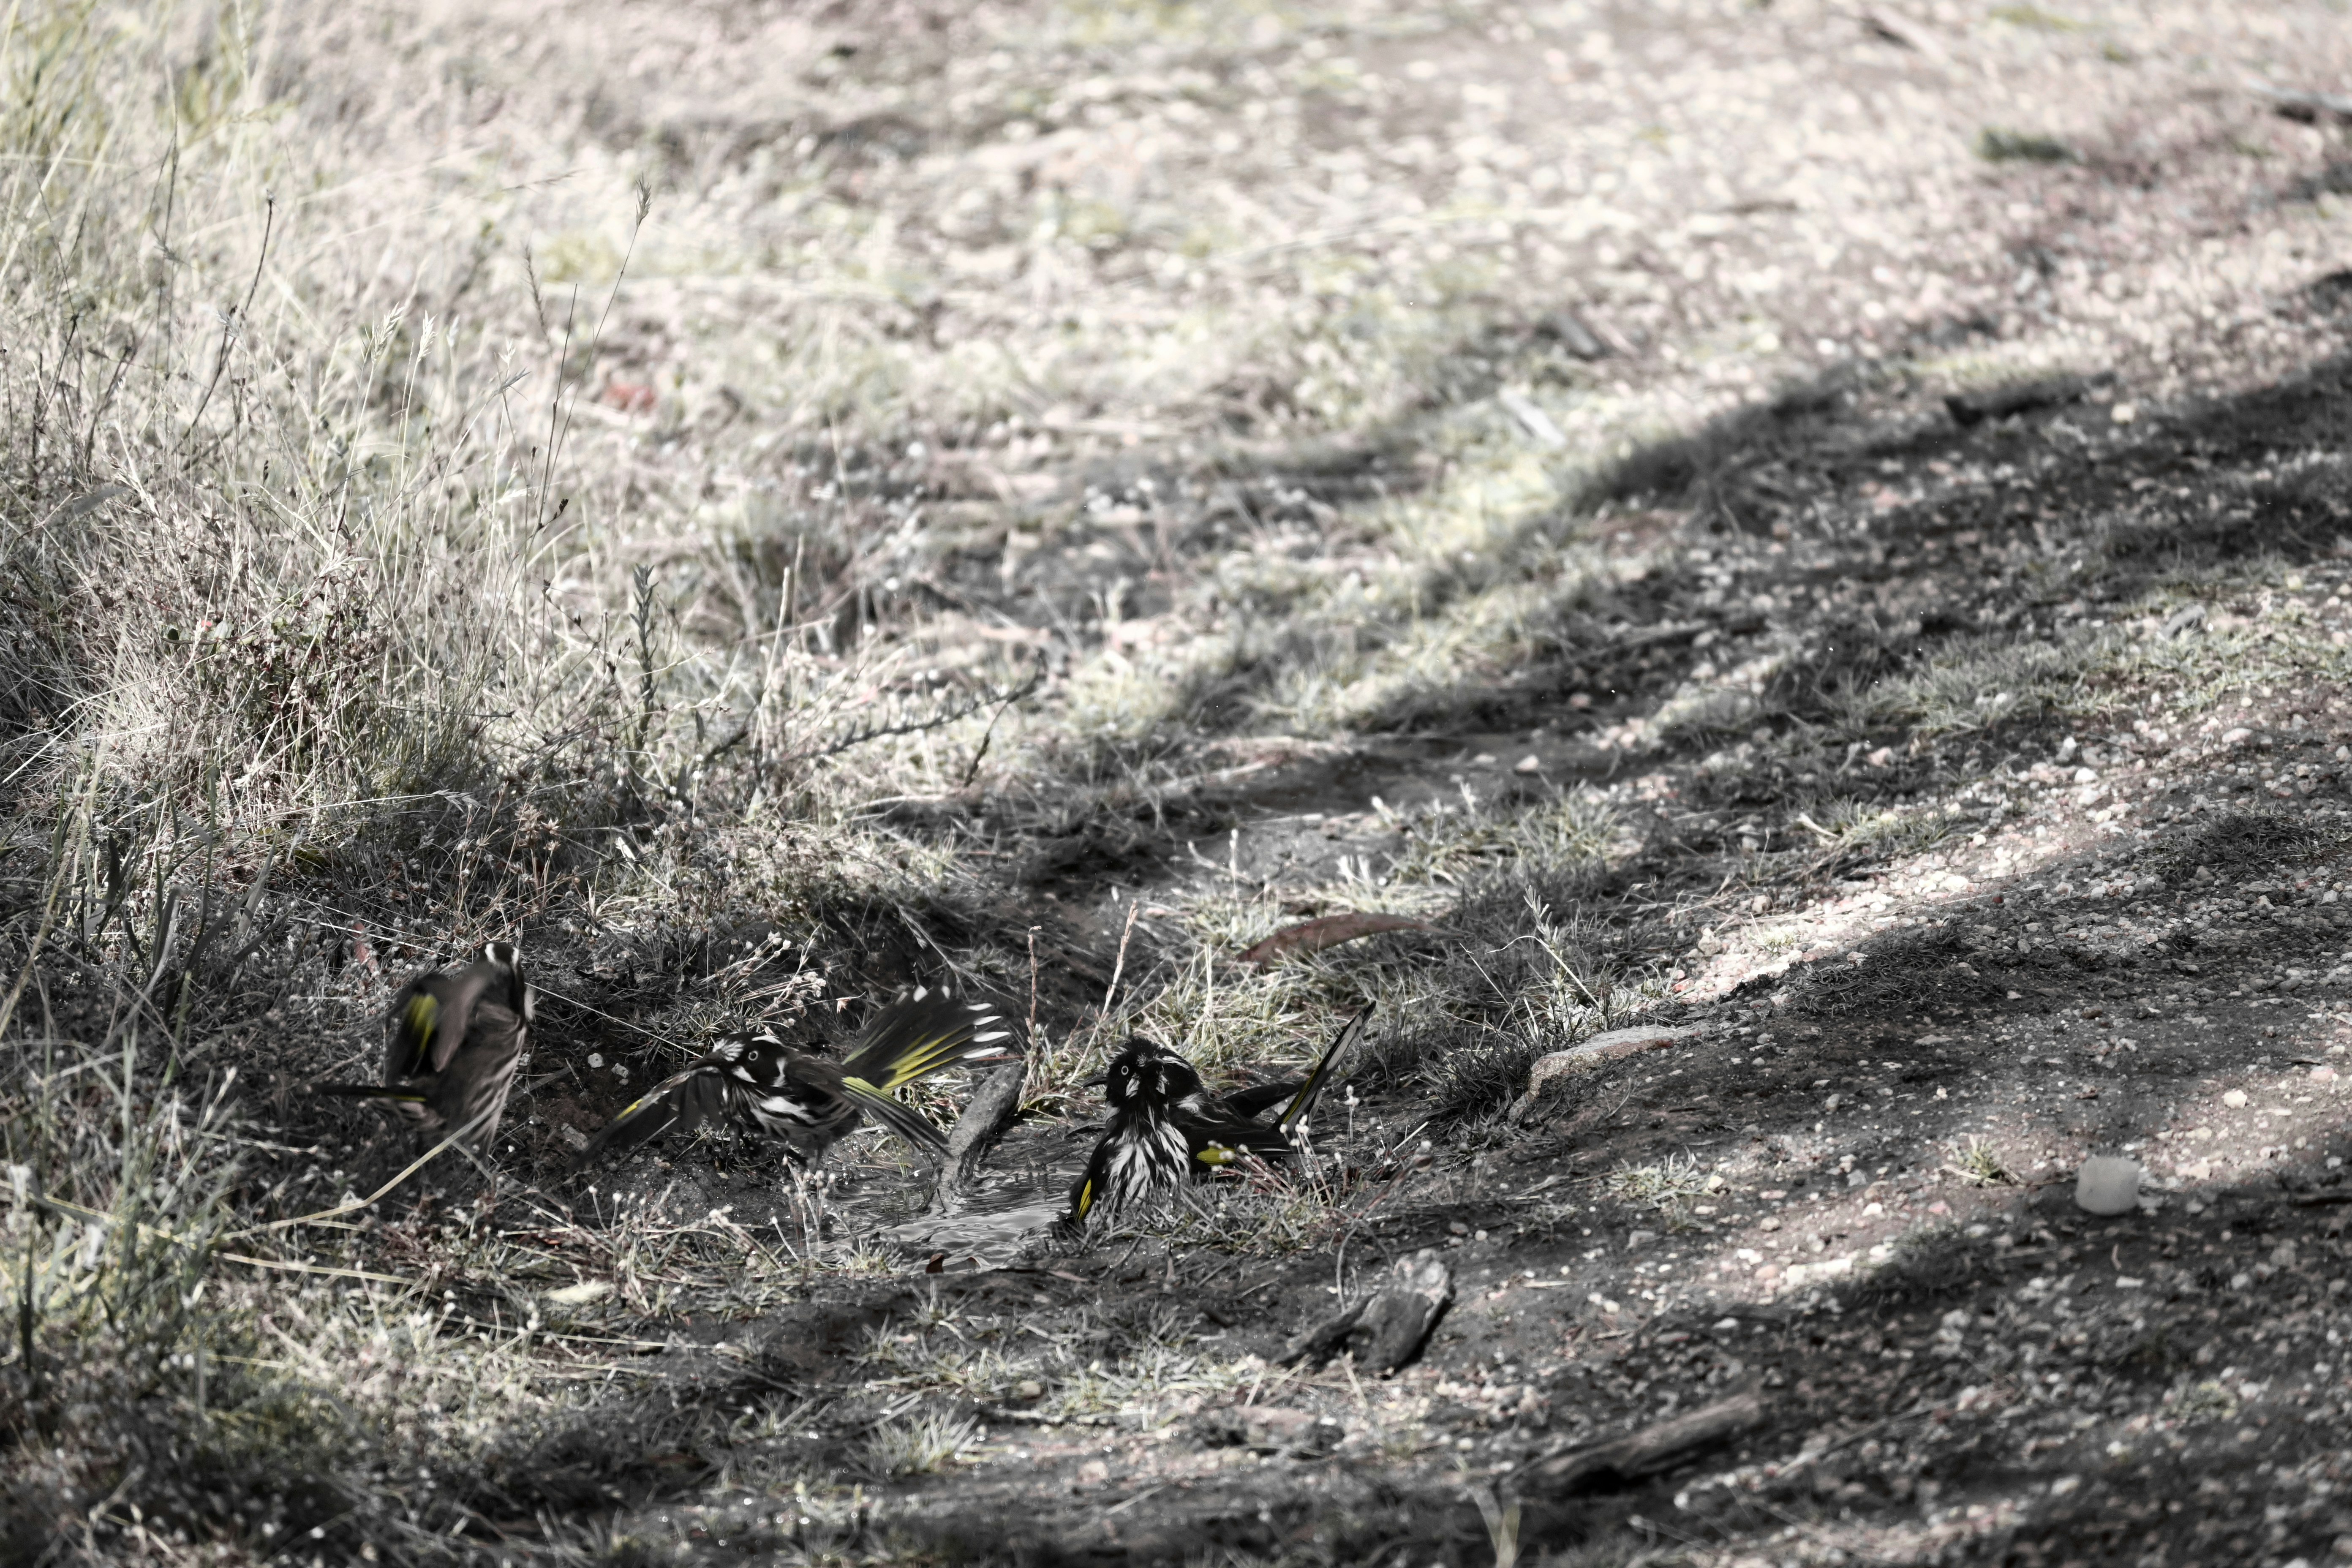 New Holland honeyeater birds by a puddle